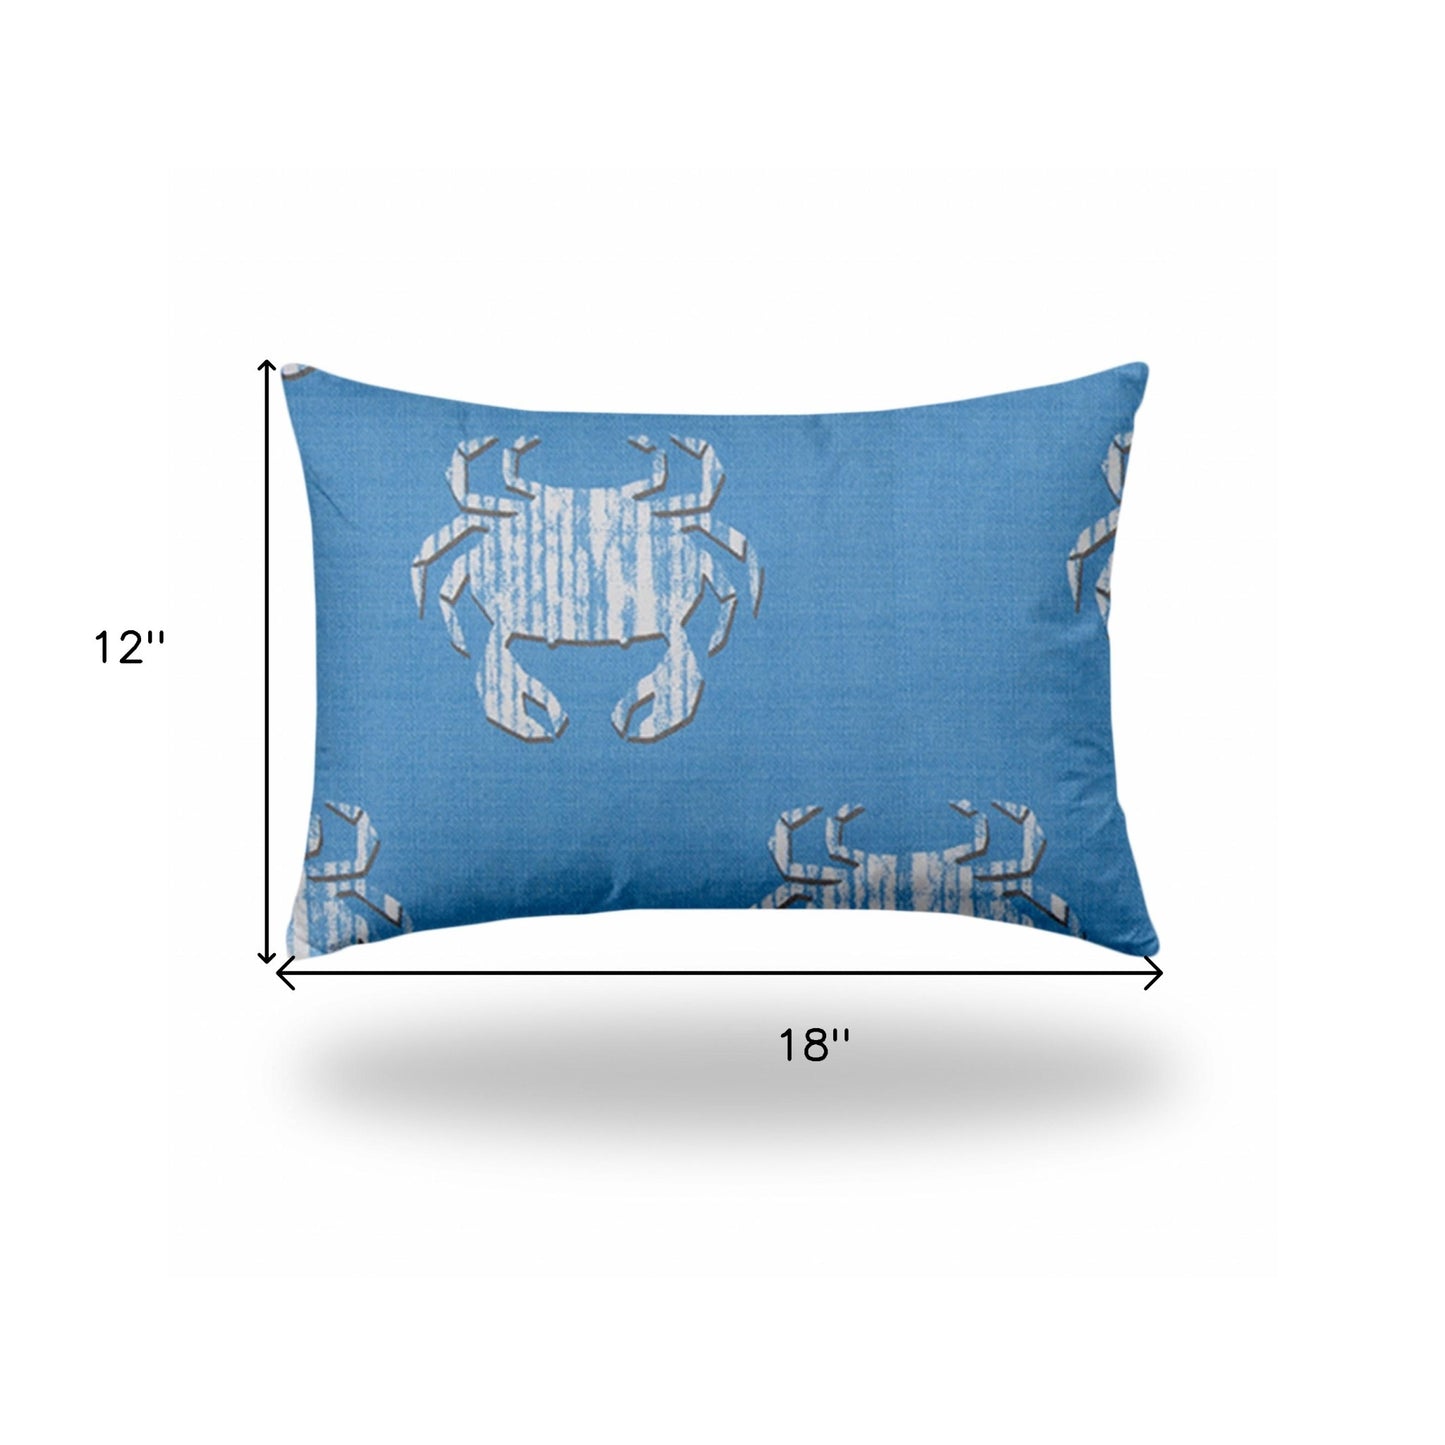 12" X 18" Blue And White Crab Enveloped Lumbar Indoor Outdoor Pillow Cover